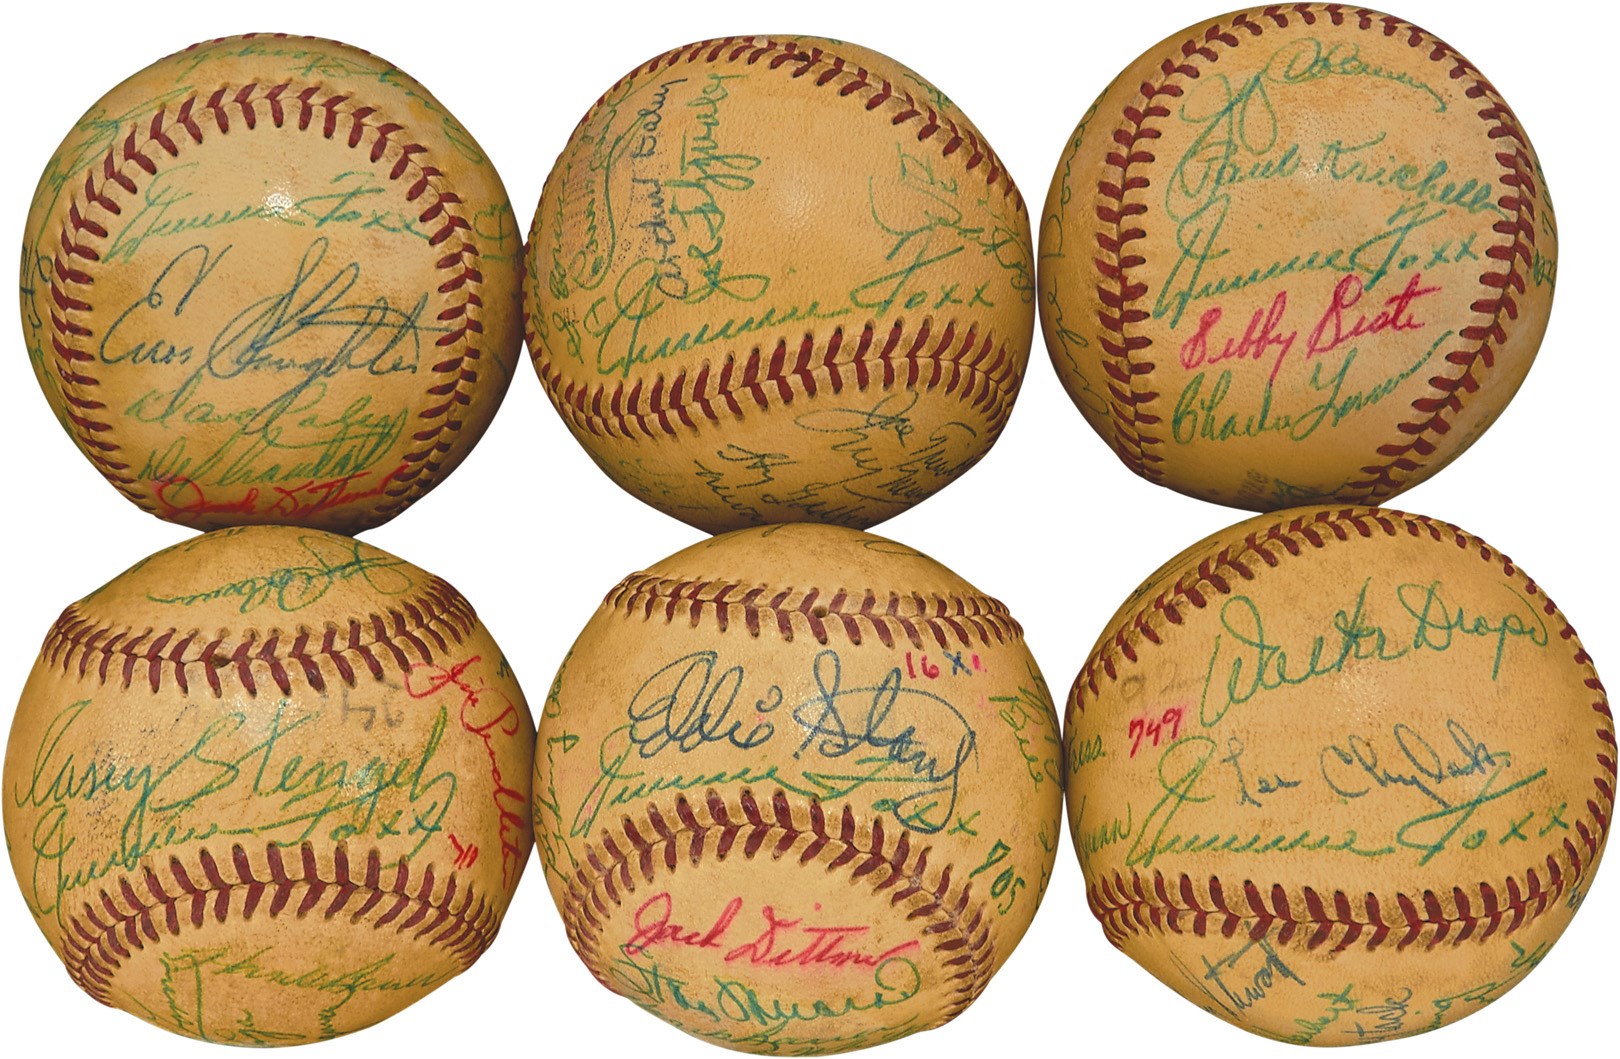 The John O'connor Signed Baseball Collection - An Incredible SIX Jimmie Foxx Signed Baseballs